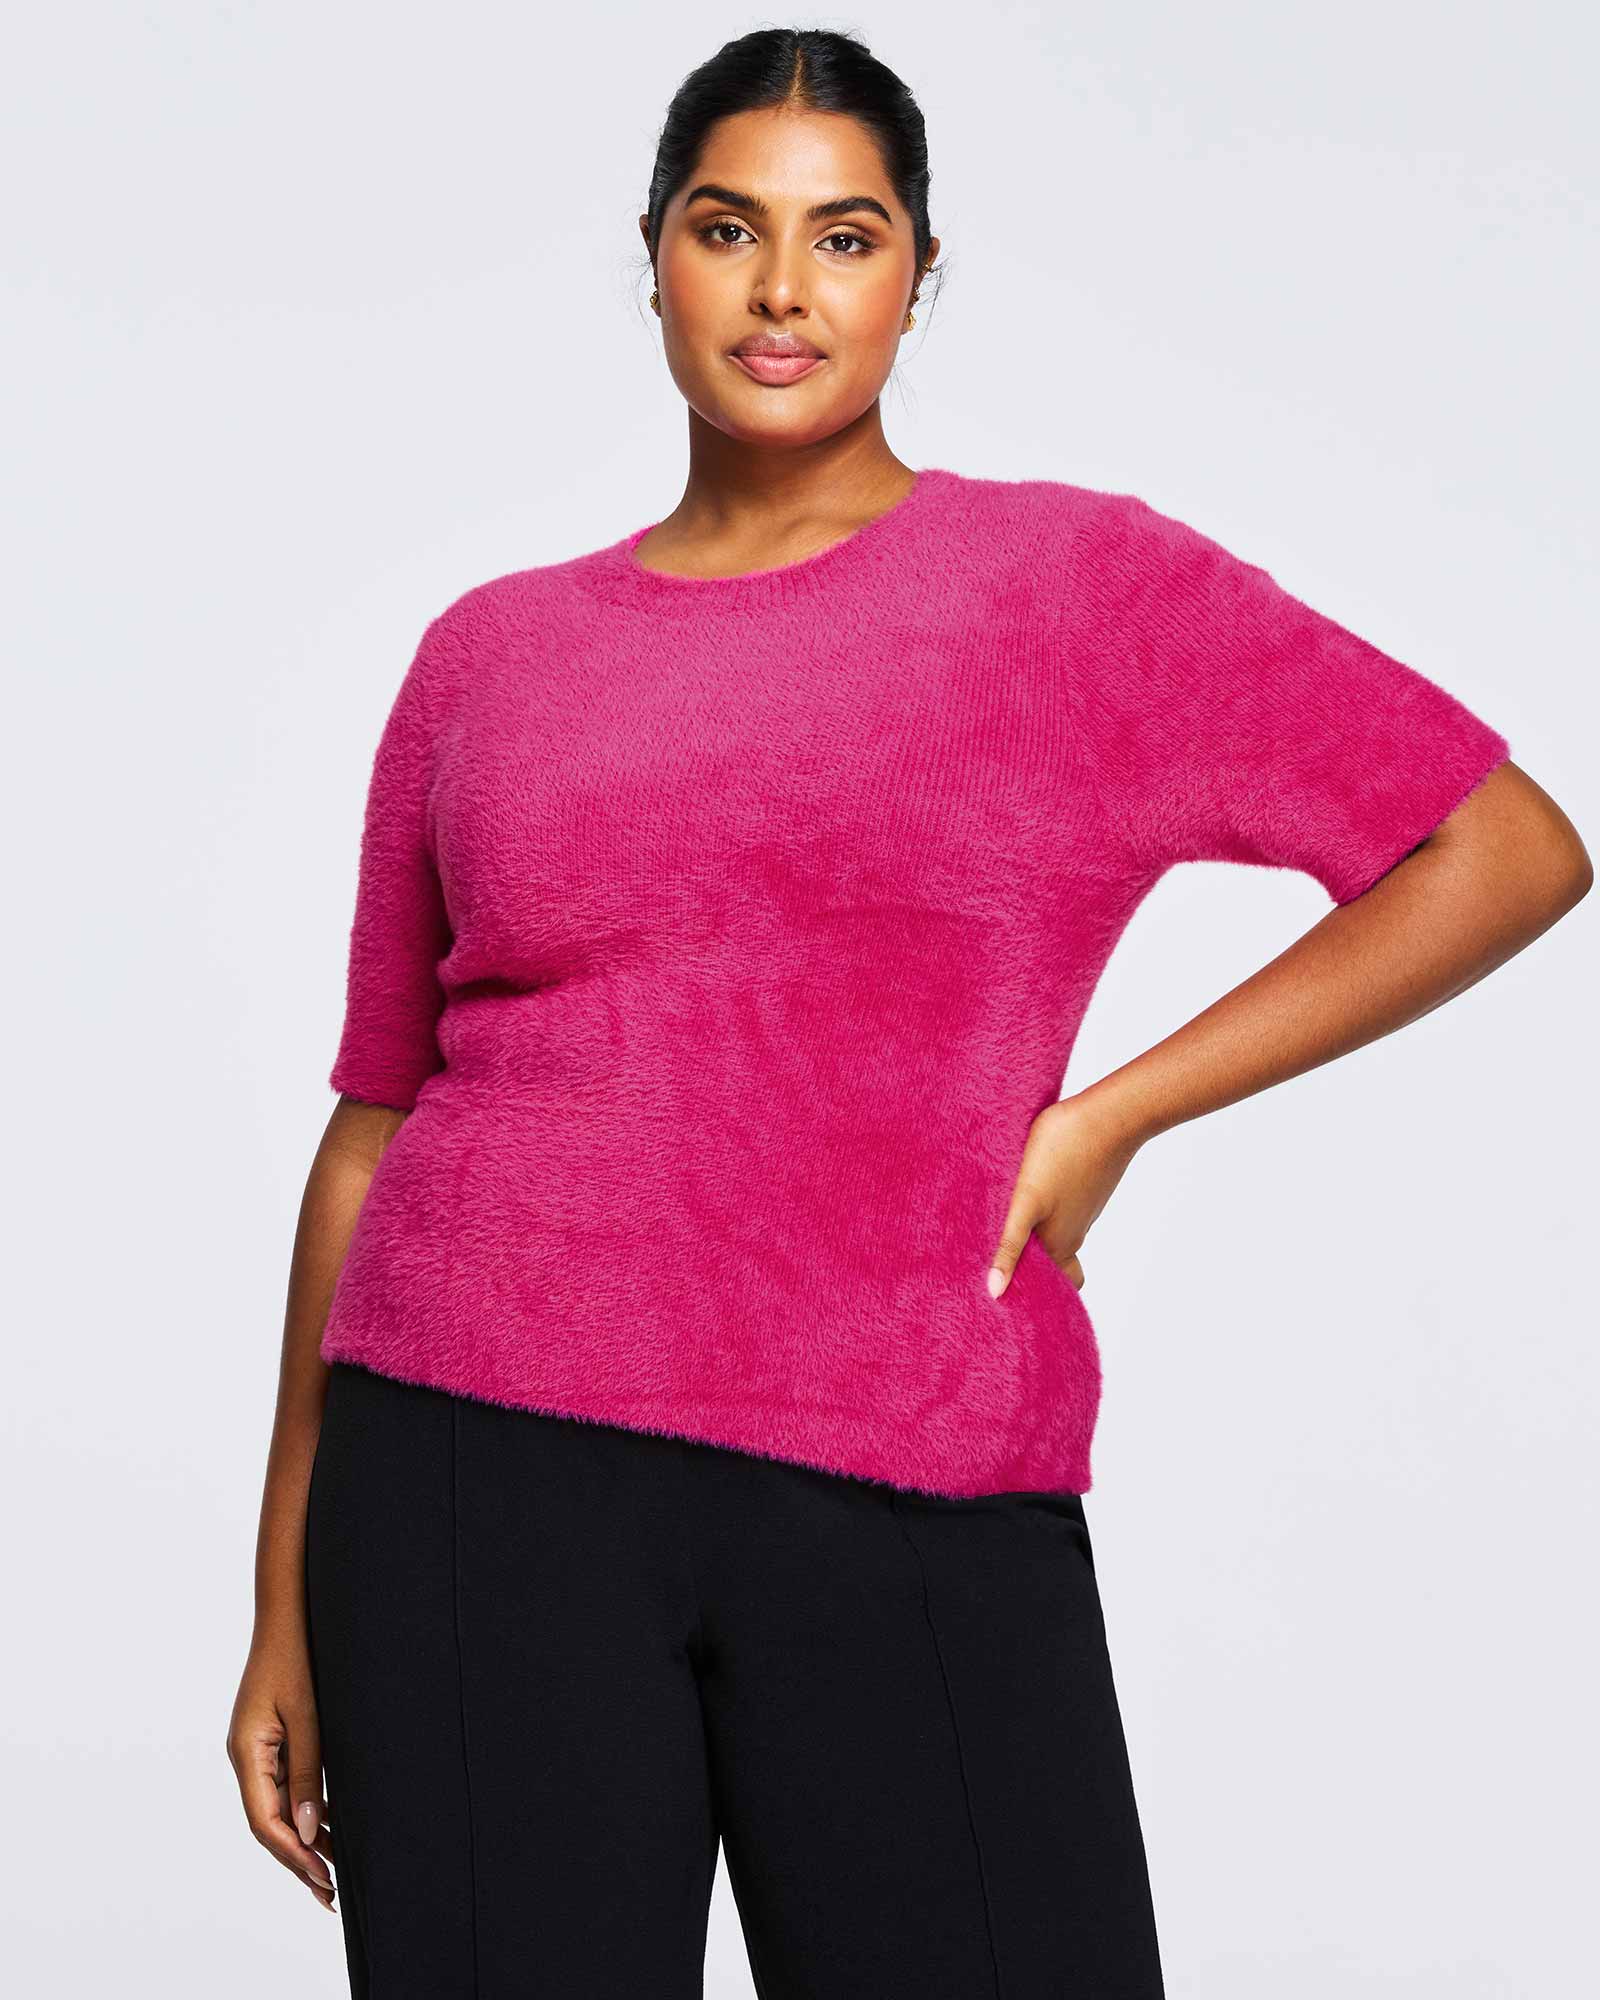 A comfortable plus-size woman wearing the Nora Fuzzy Pink Short Sleeved Sweater.